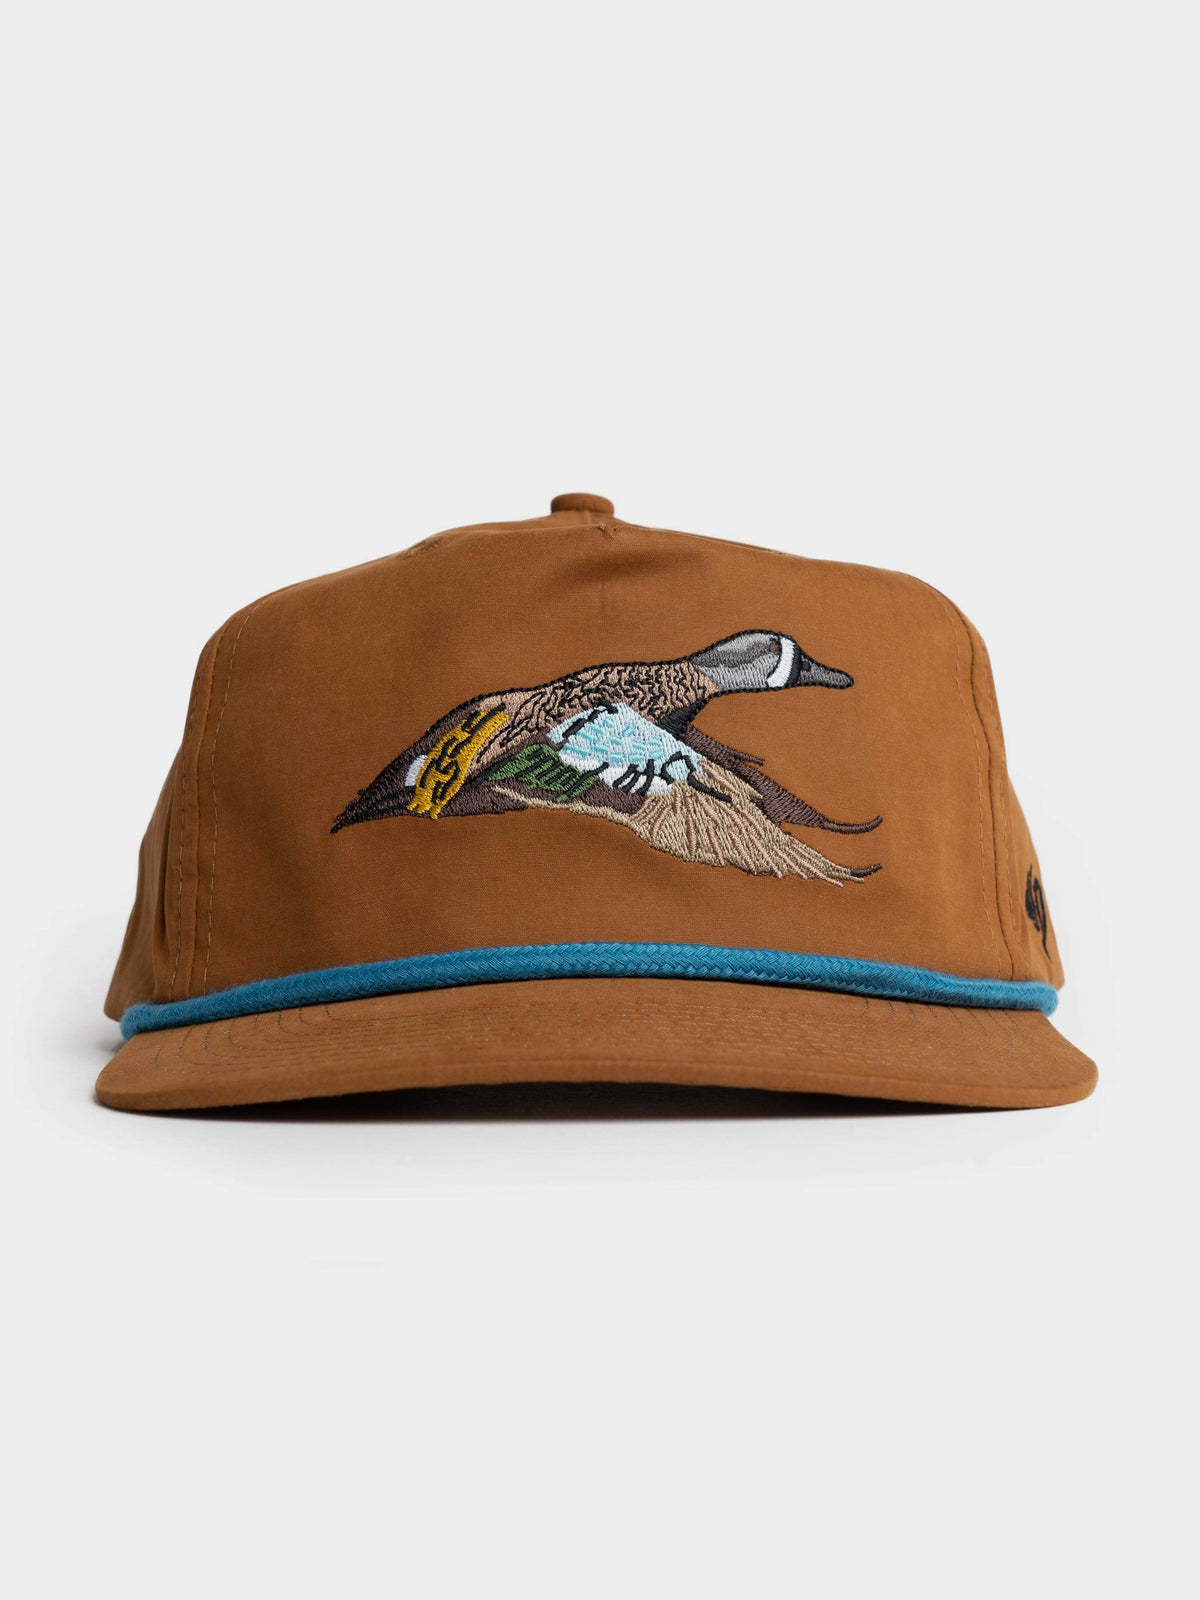 Grandpa Hat | Blue Winged Teal Pintail | Duck Camp